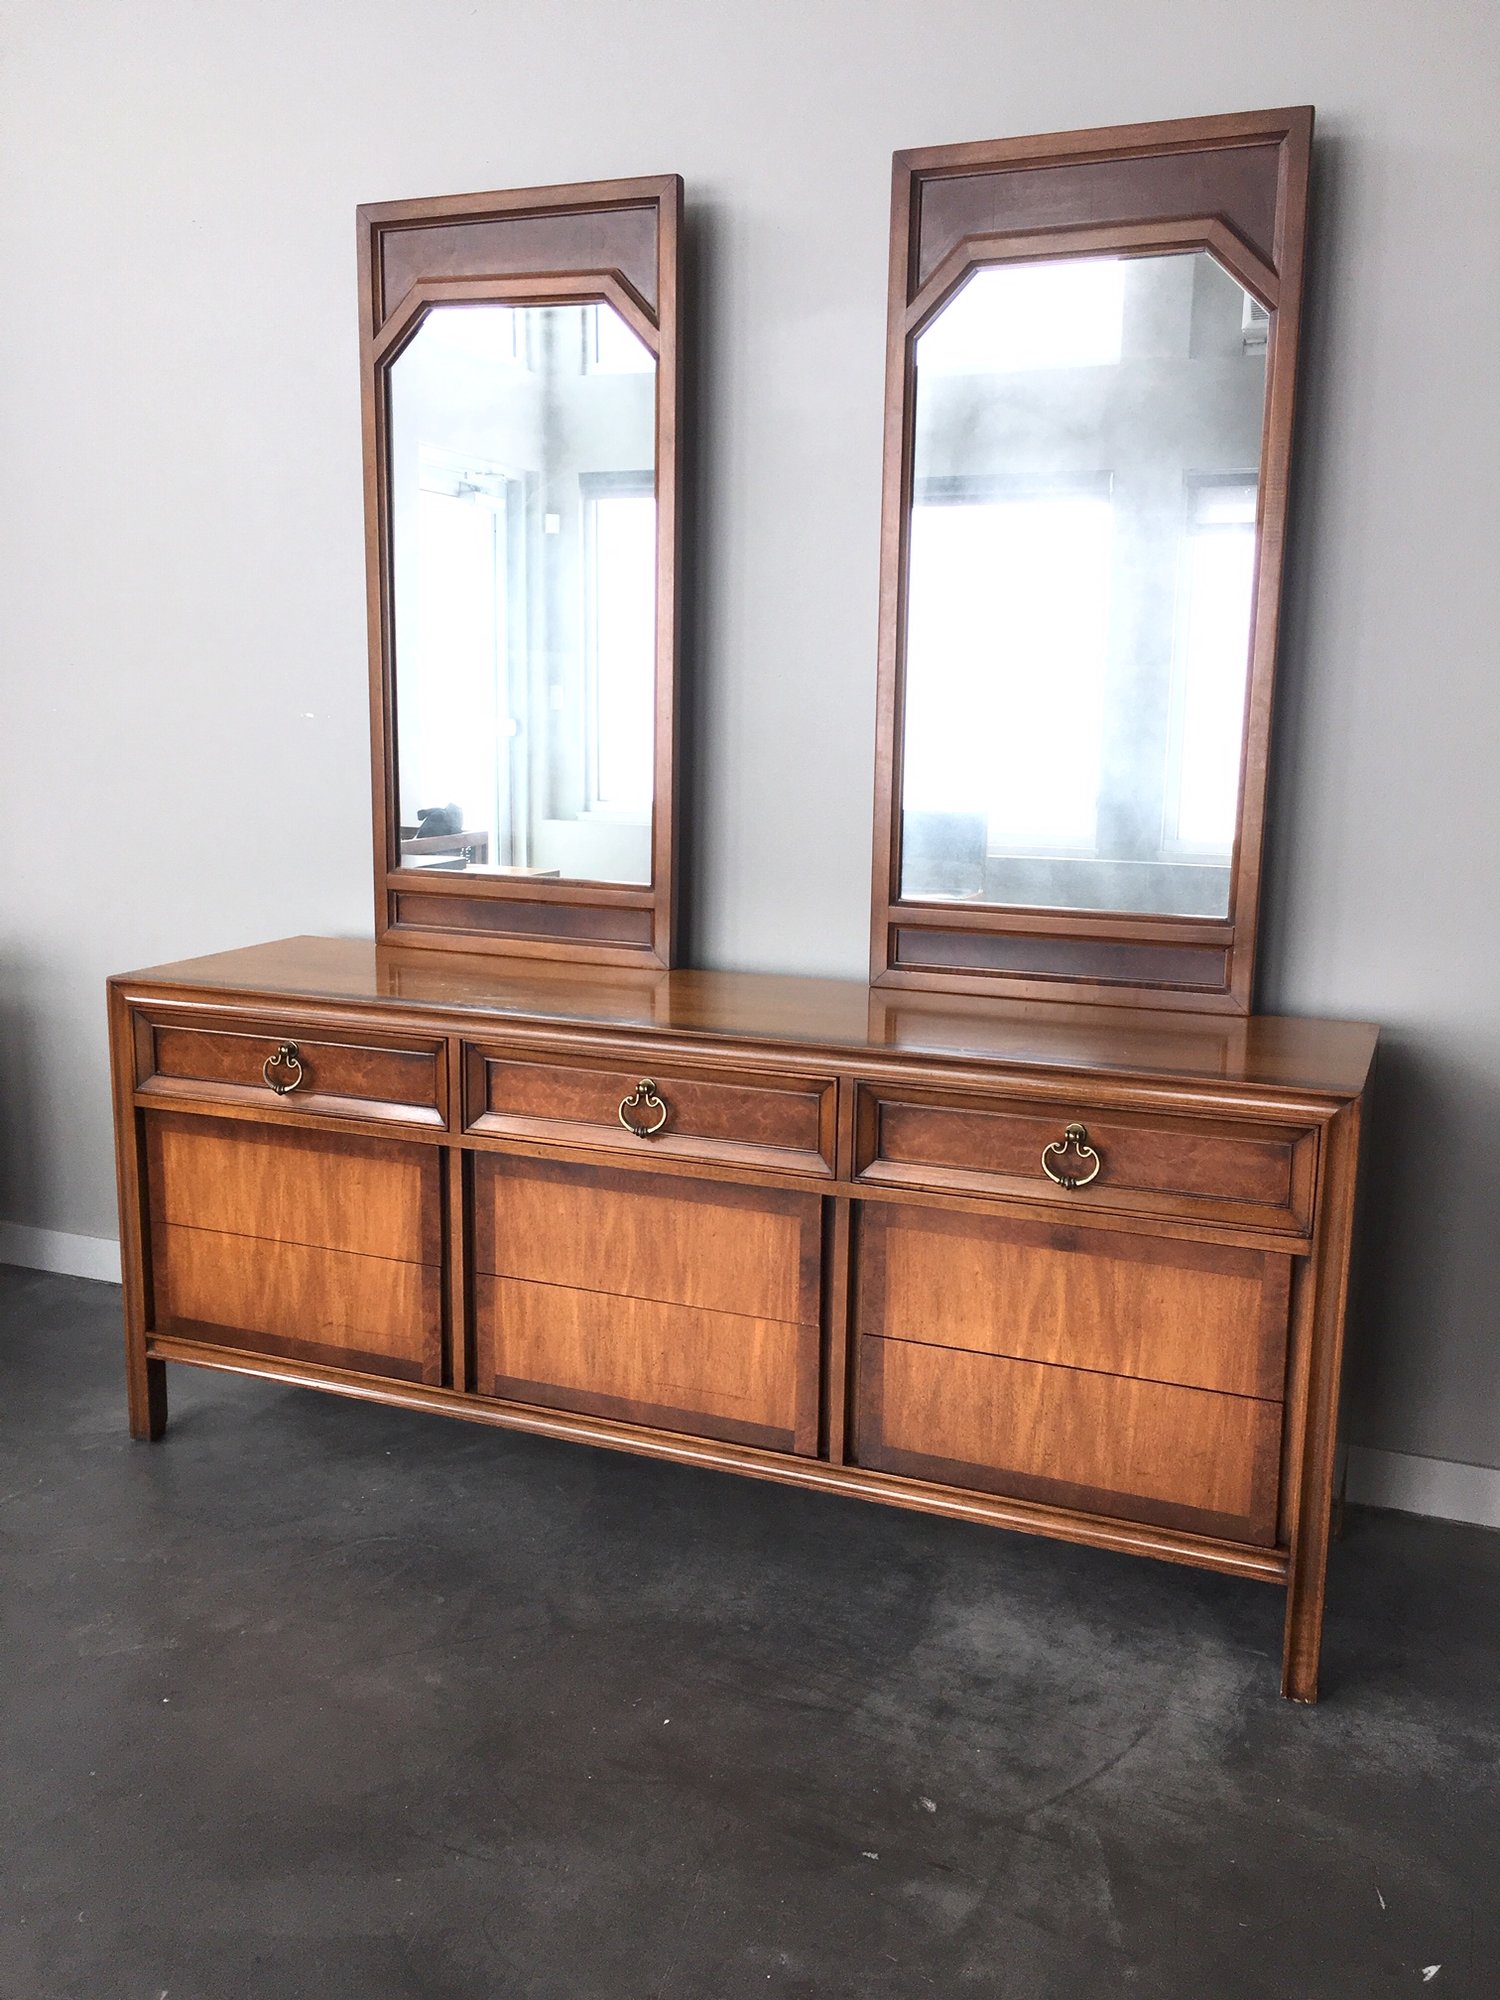 Vintage Mid Century Modern Lowboy Dresser With Double Mirrors By